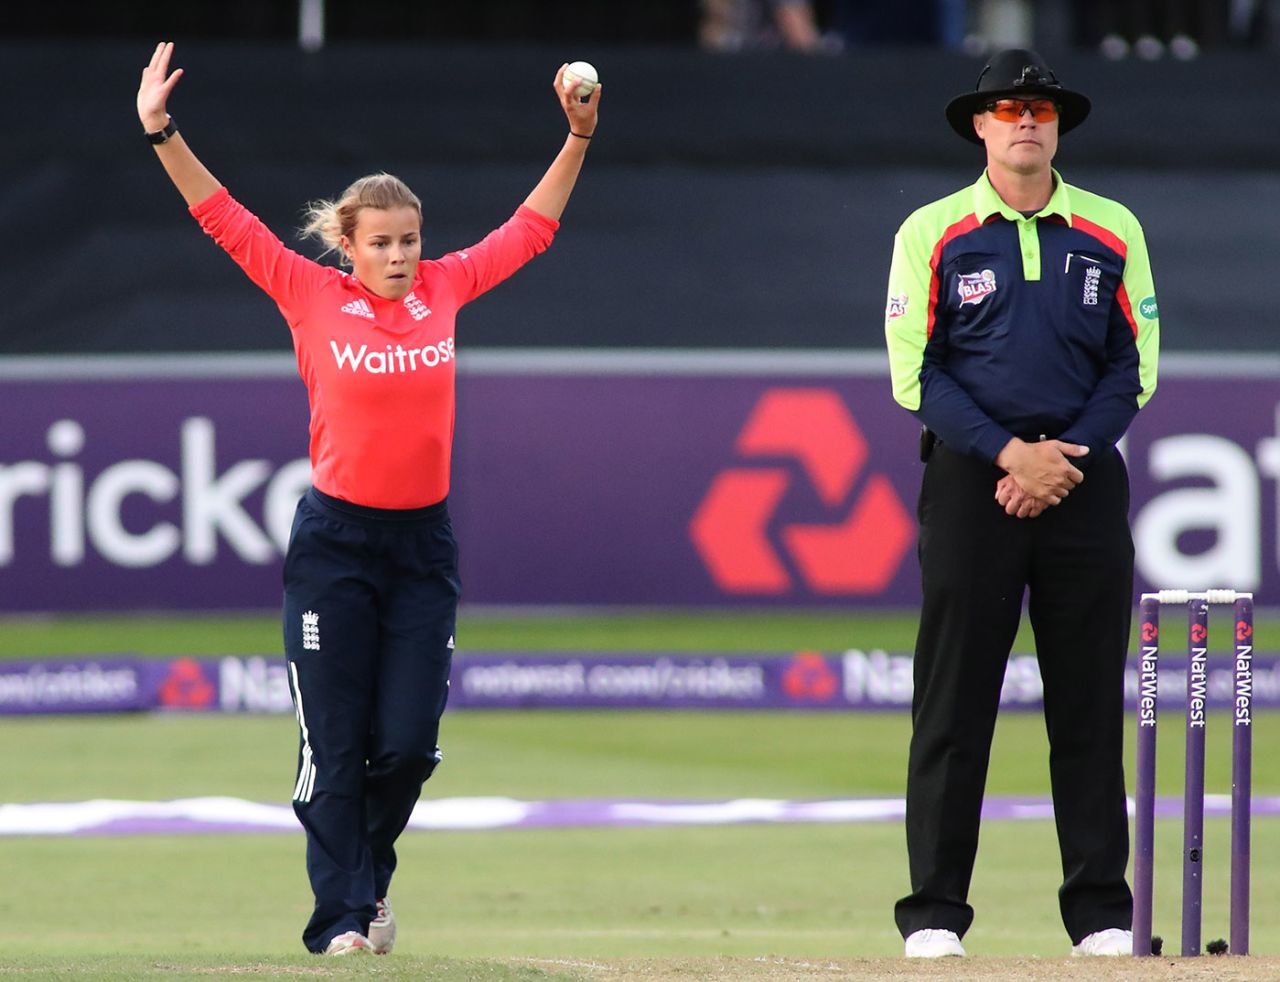 Alex Hartley took two wickets in two overs, England Women v Pakistan Women, 3rd T20I, Chelmsford, July 7, 2016